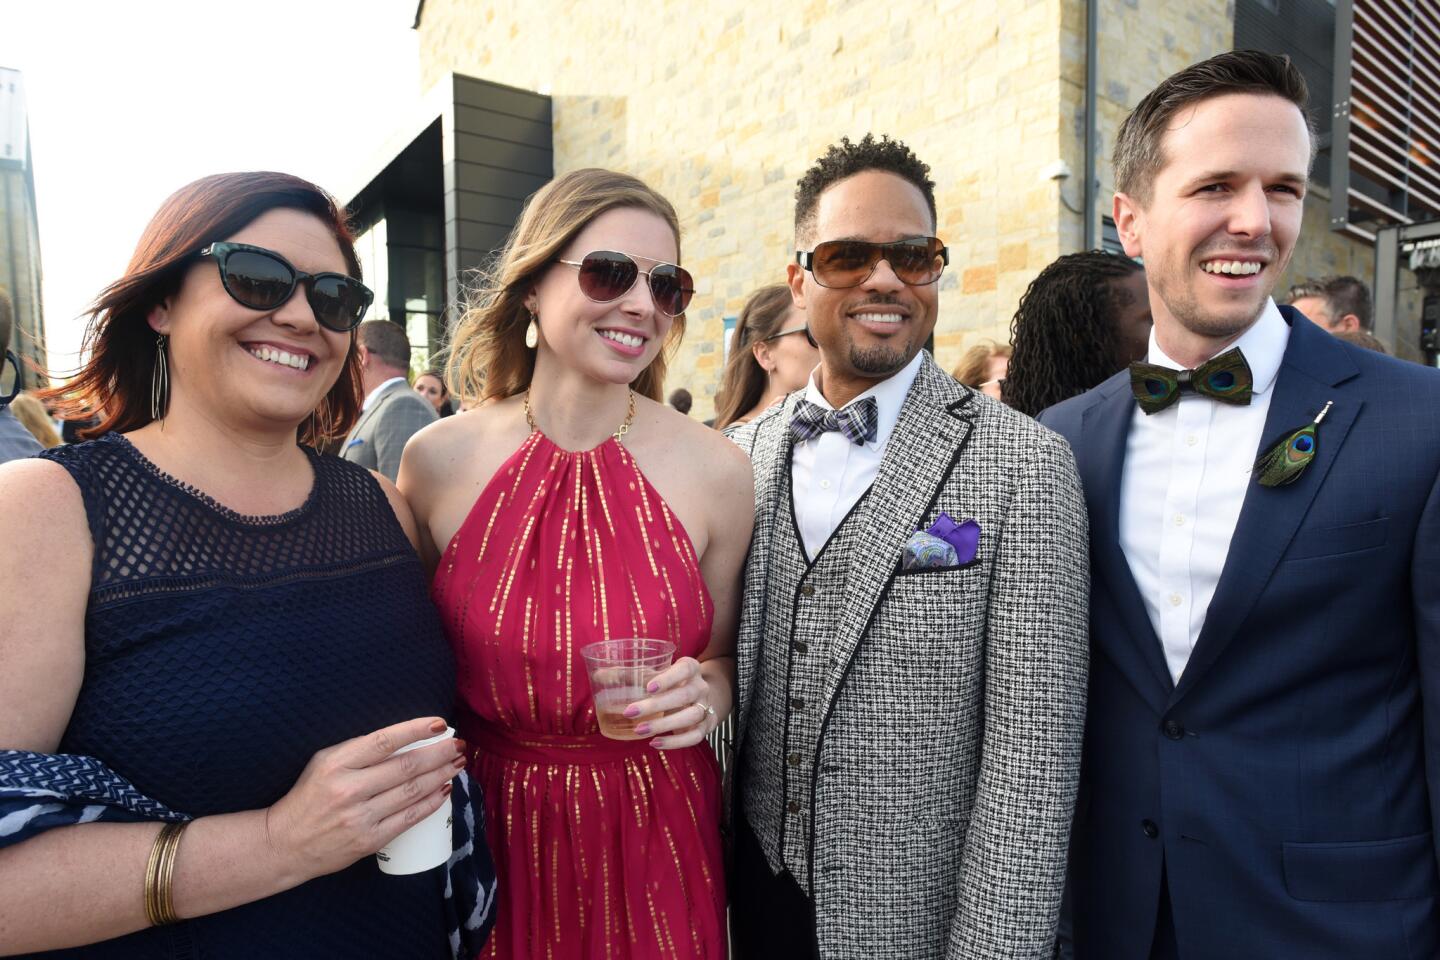 From left, Abby Beck, Amanda Jackson, Earle Bannister and Ryan Uhle at the Bourbon and Bowties charity fundraiser held at Rye Street Tavern in Port Covington.